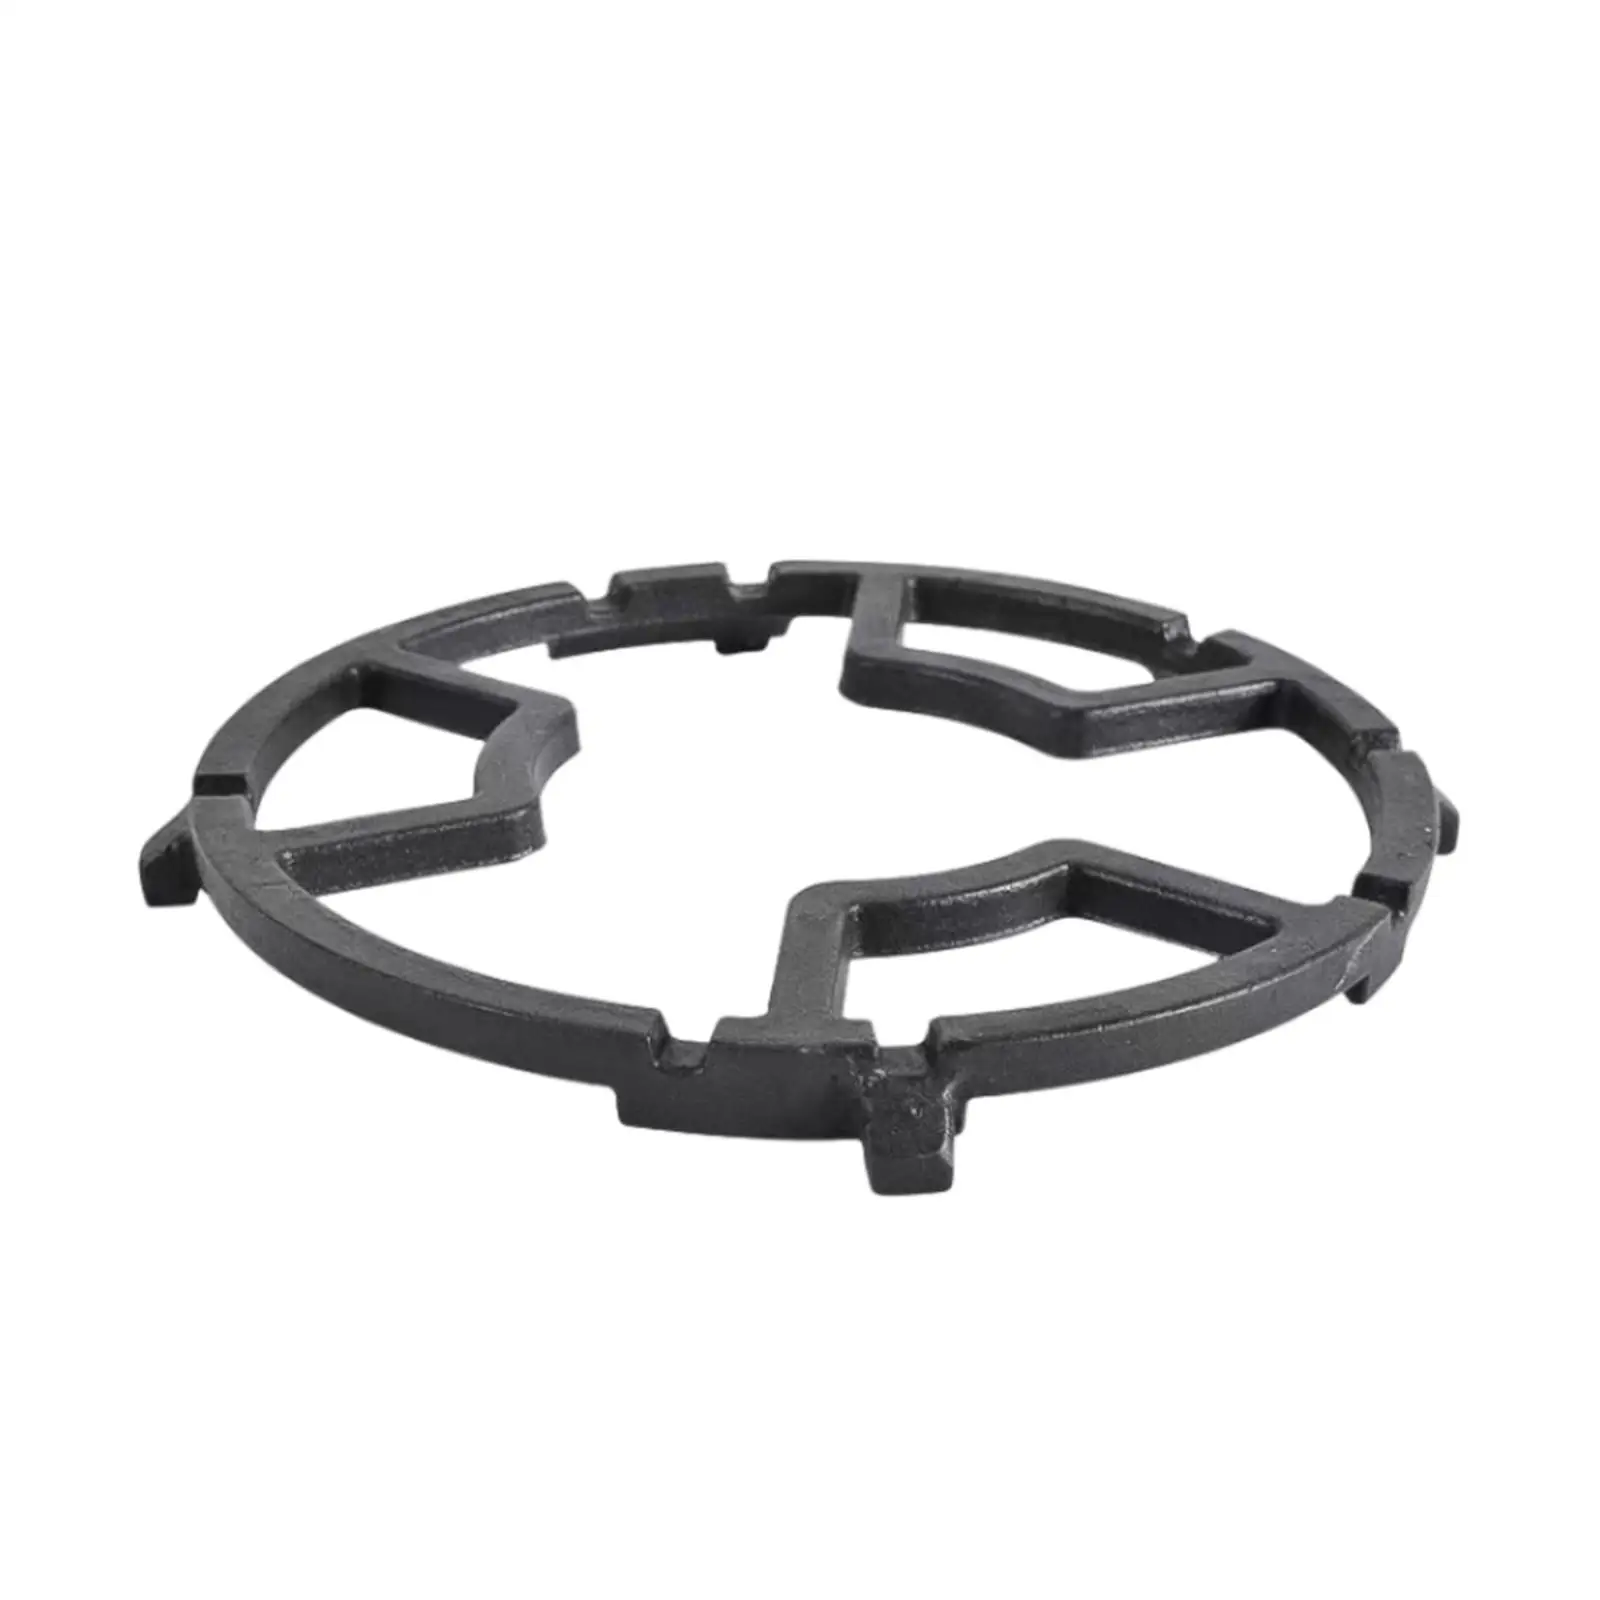 Gas Rings Reducer Trivets Top Wok Rack Rings Durable Wok Stand Rack for Camping Tea Kettles Restaurant Kitchen Sauce Pans